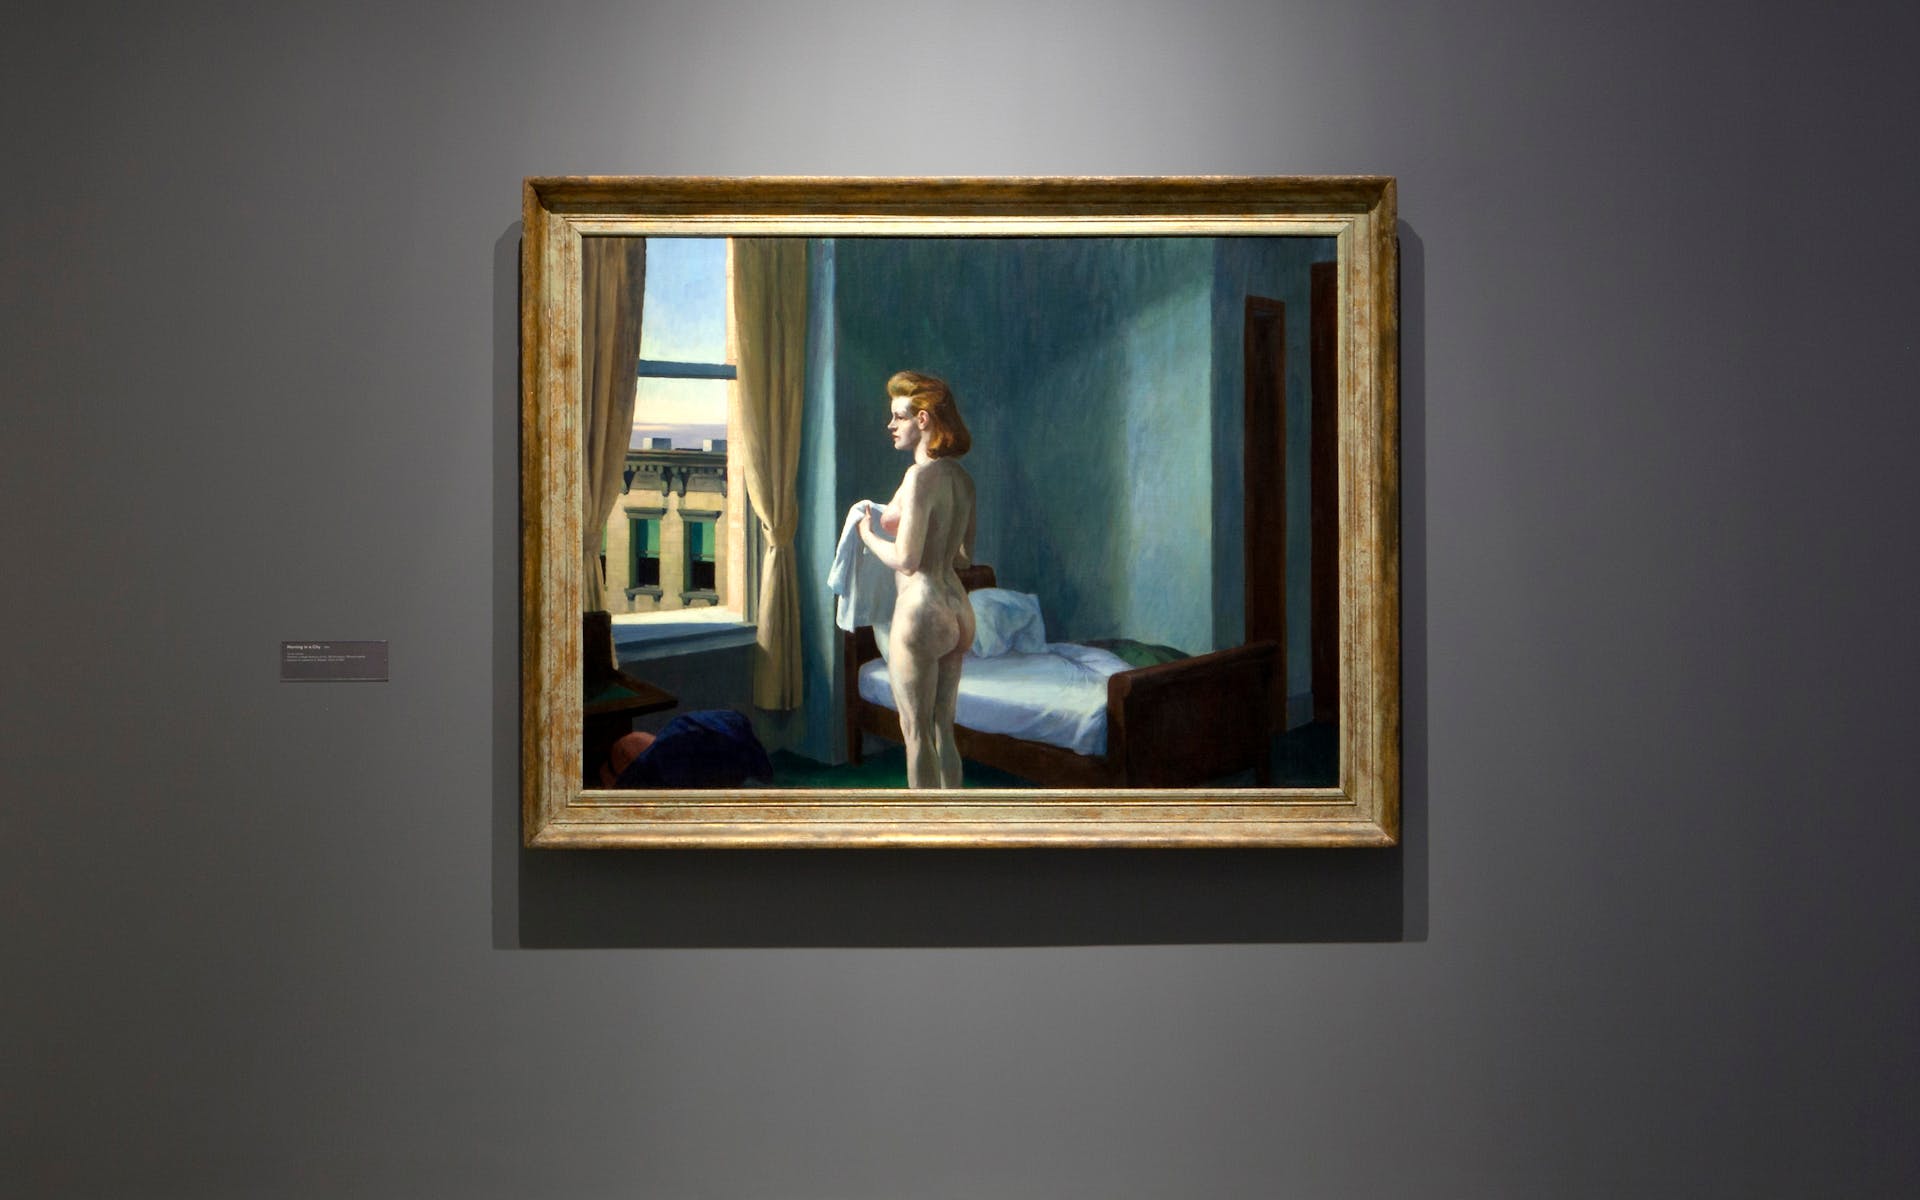 View of the exhibition Hopper Drawing: A Painter’s Process, 2014; Edward Hopper, Morning in a City, 1944